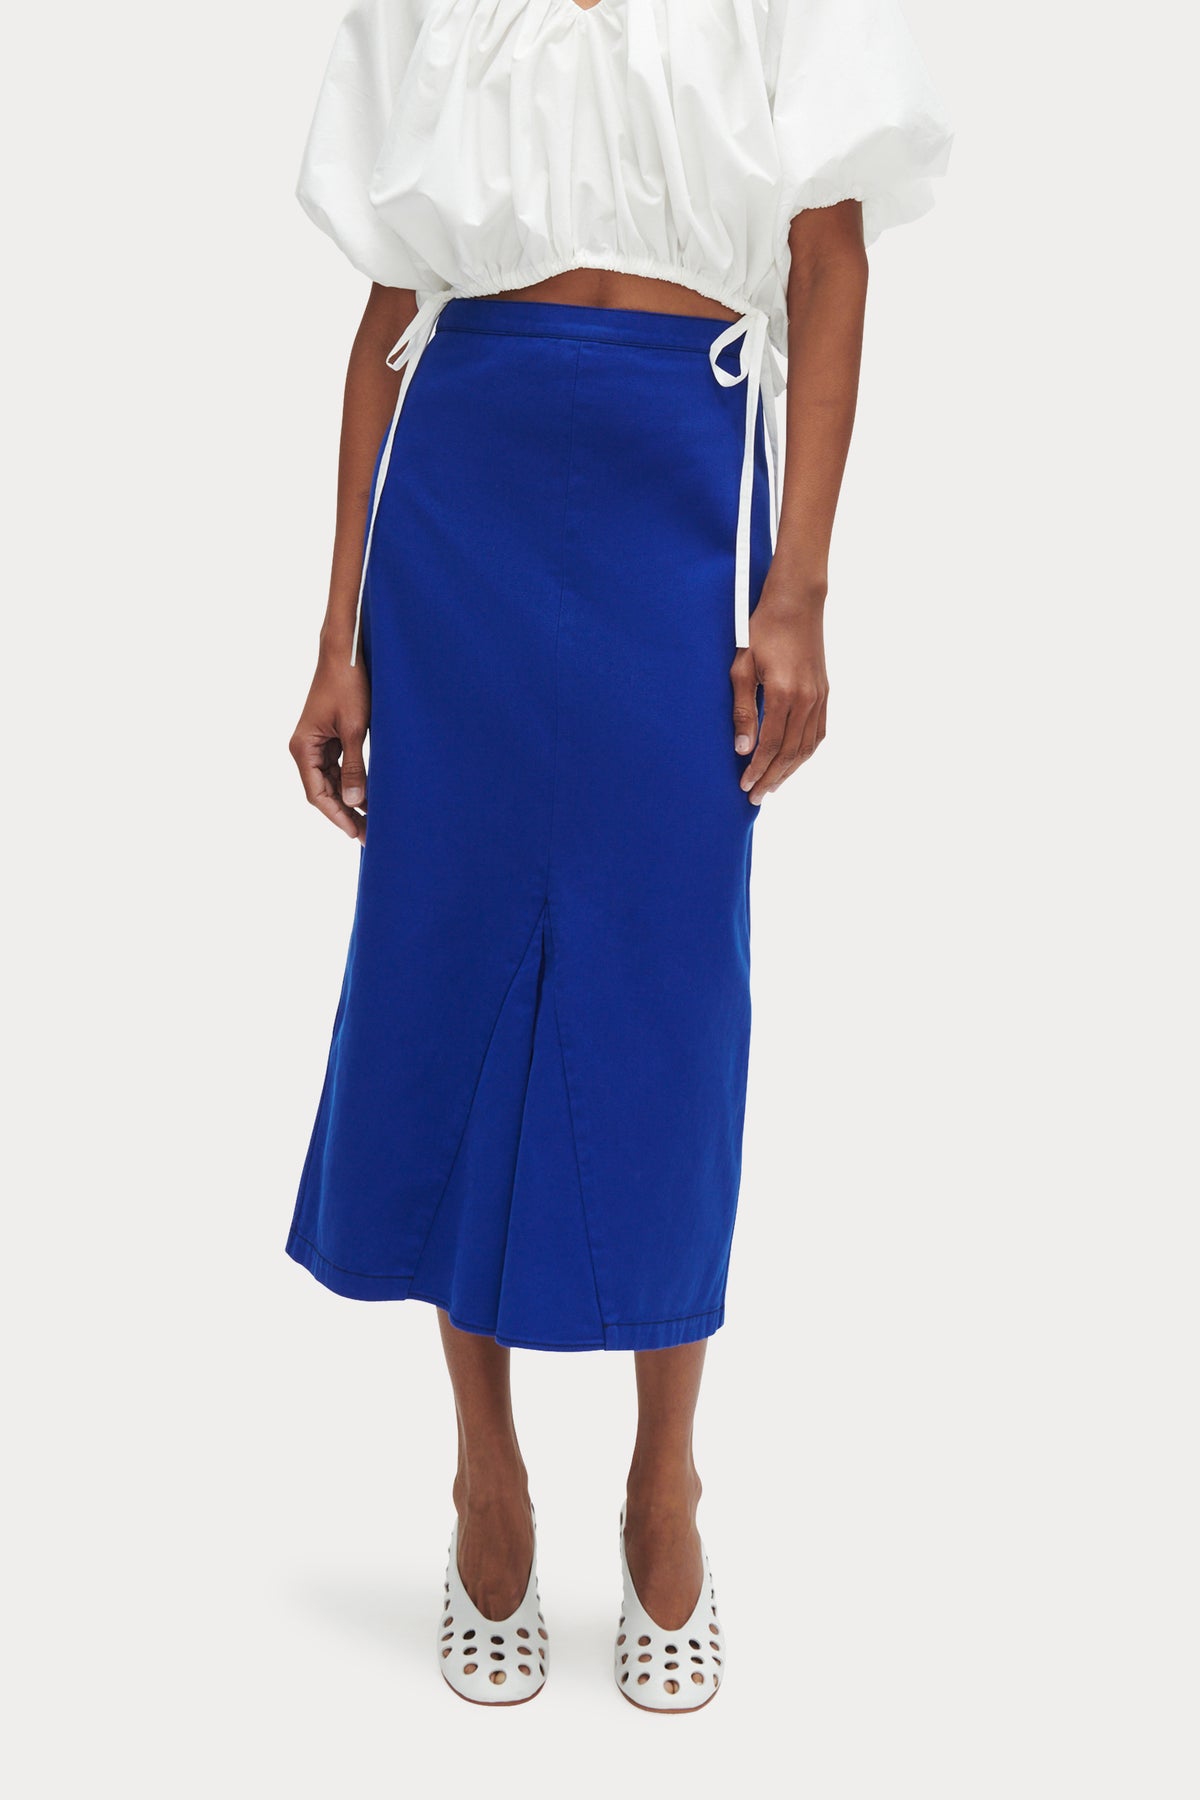 Skirts and Shorts | Rachel Comey